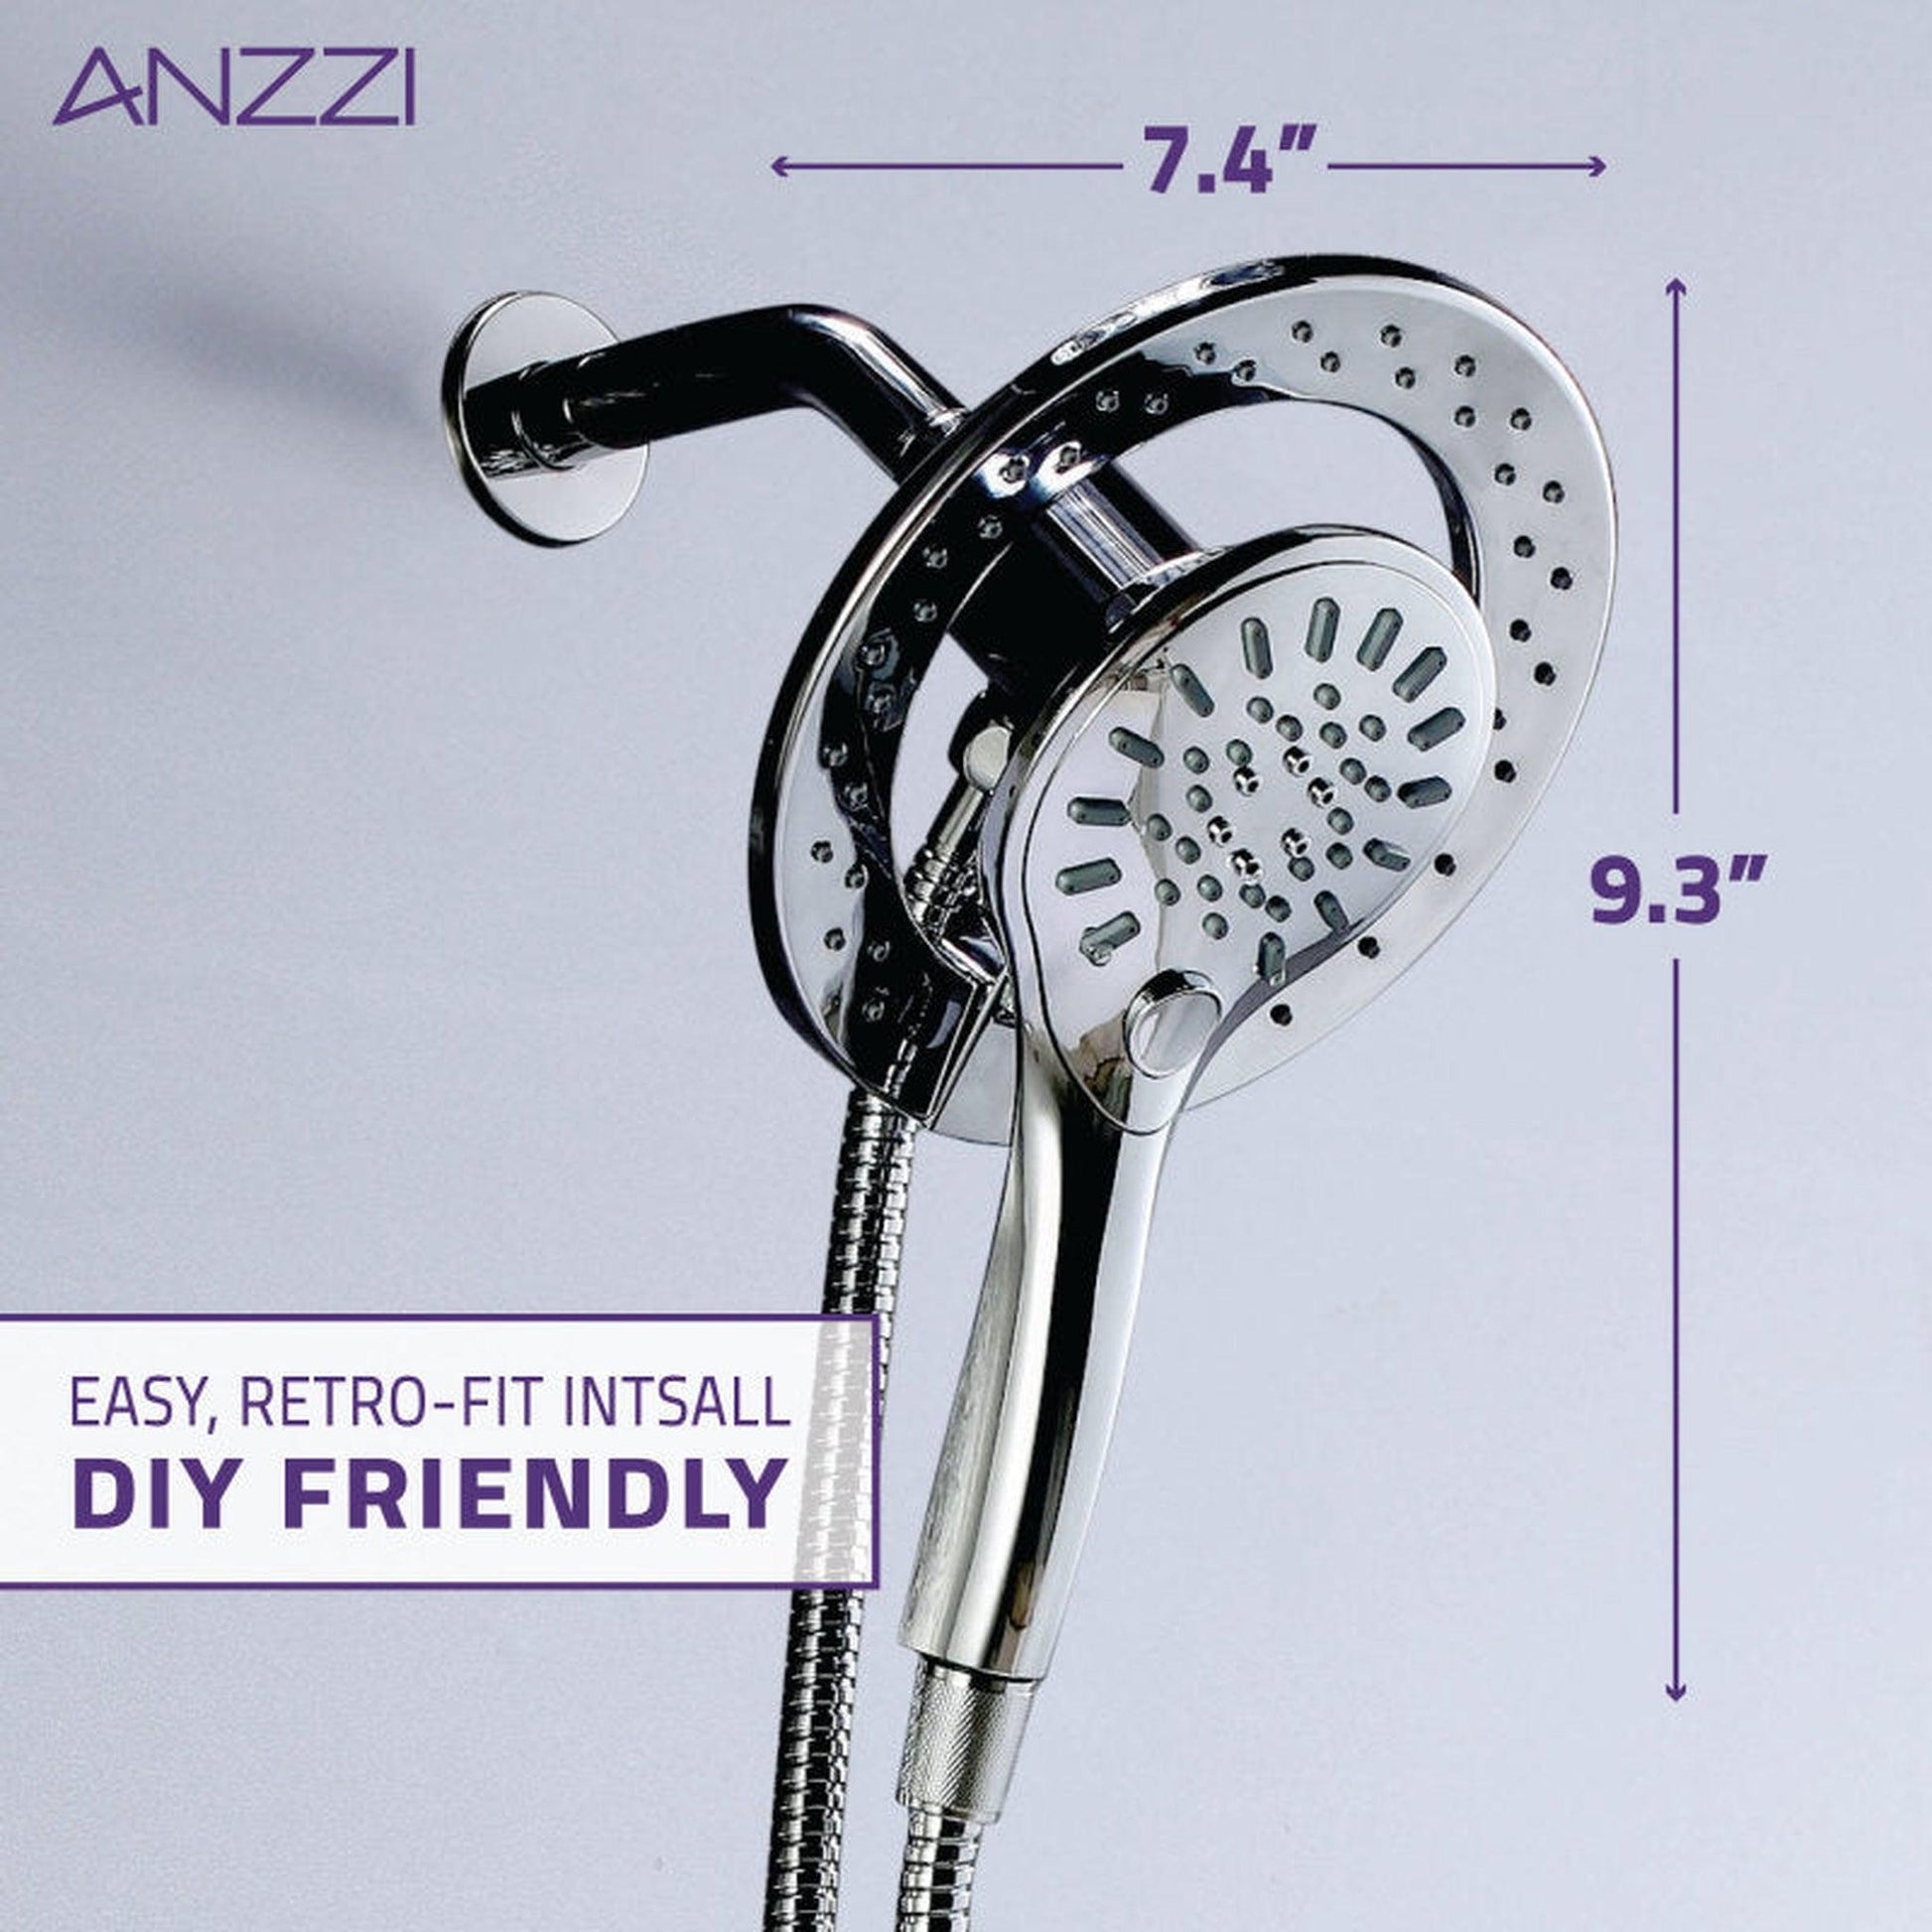 ANZZI Valkrie Series Wall-Mounted Polished Chrome Dual Mode Shower Head System With Magnetic Diverter